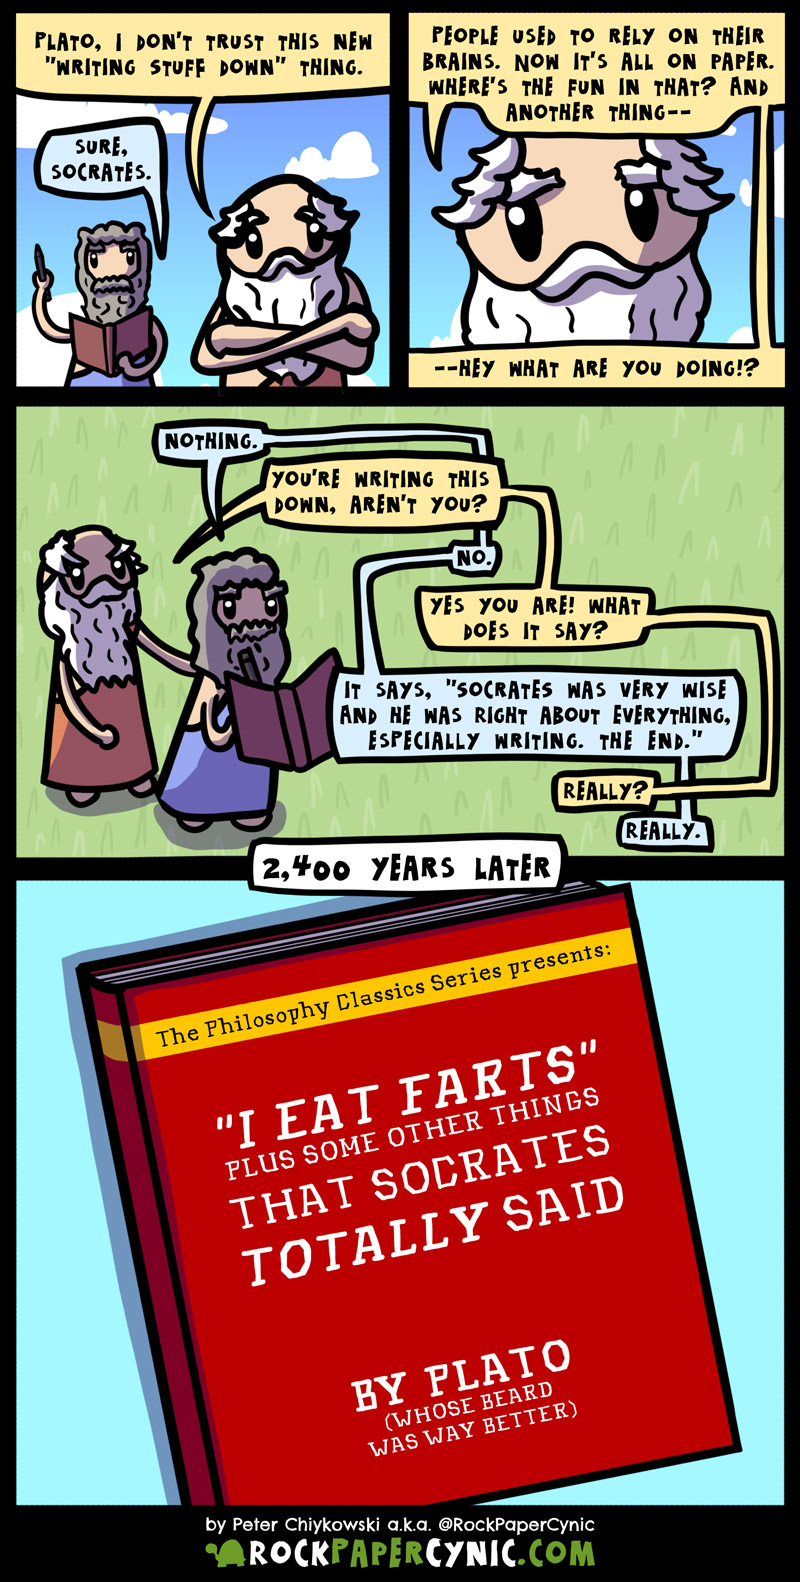 Socrates and Plato battle it out over whether or not writing things down is a good idea SURPRISE it totally is!